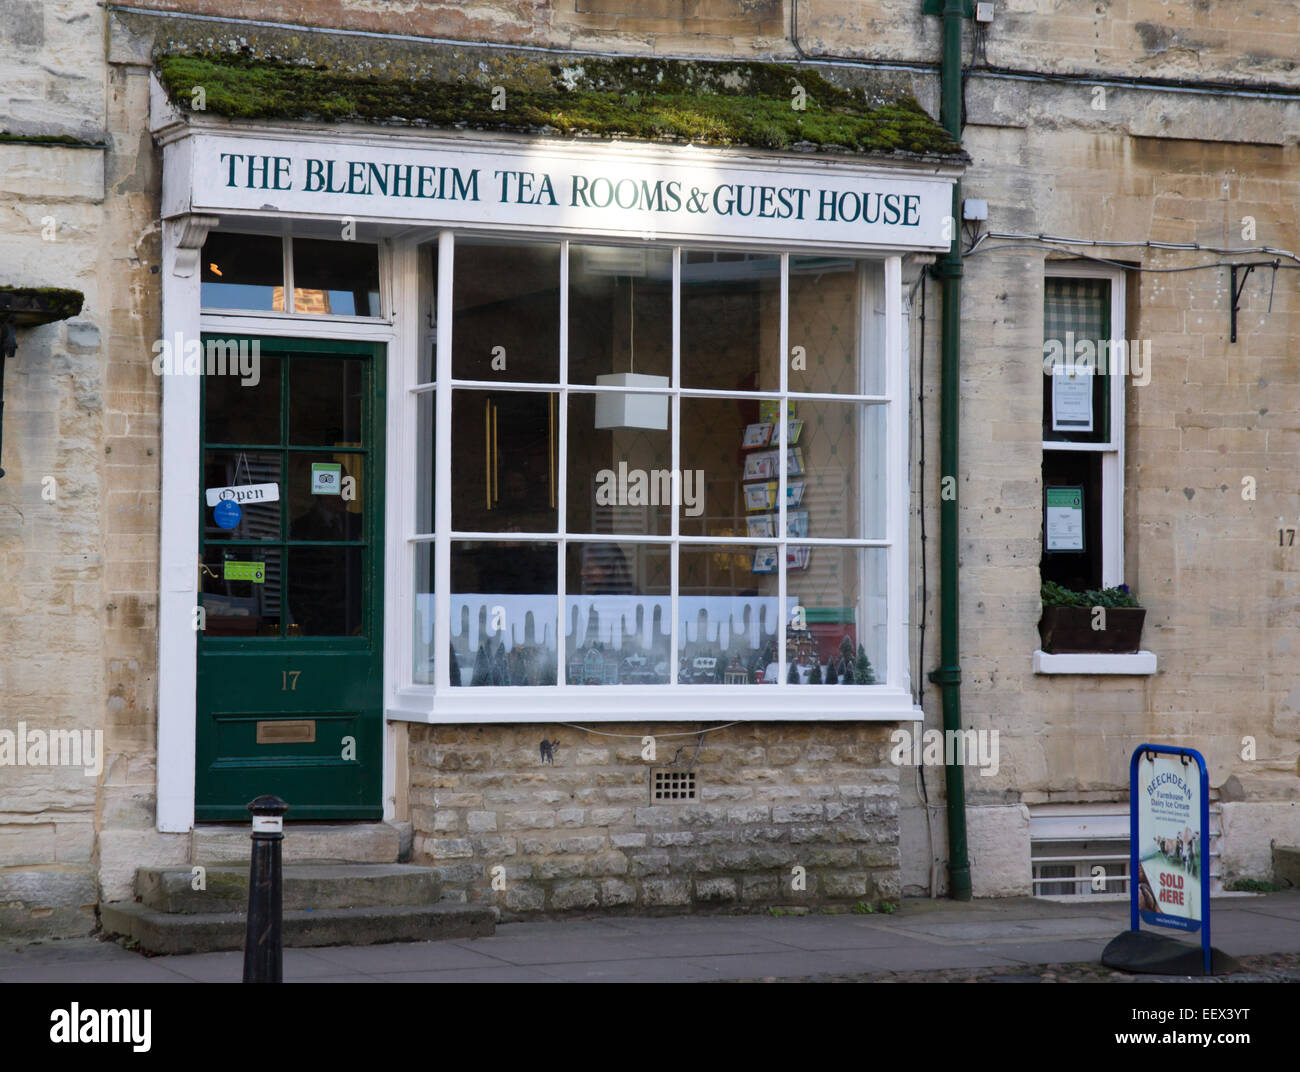 Woodstock a small town in Oxfordshire England UK Blenheim Tea Rooms and Guest House Stock Photo